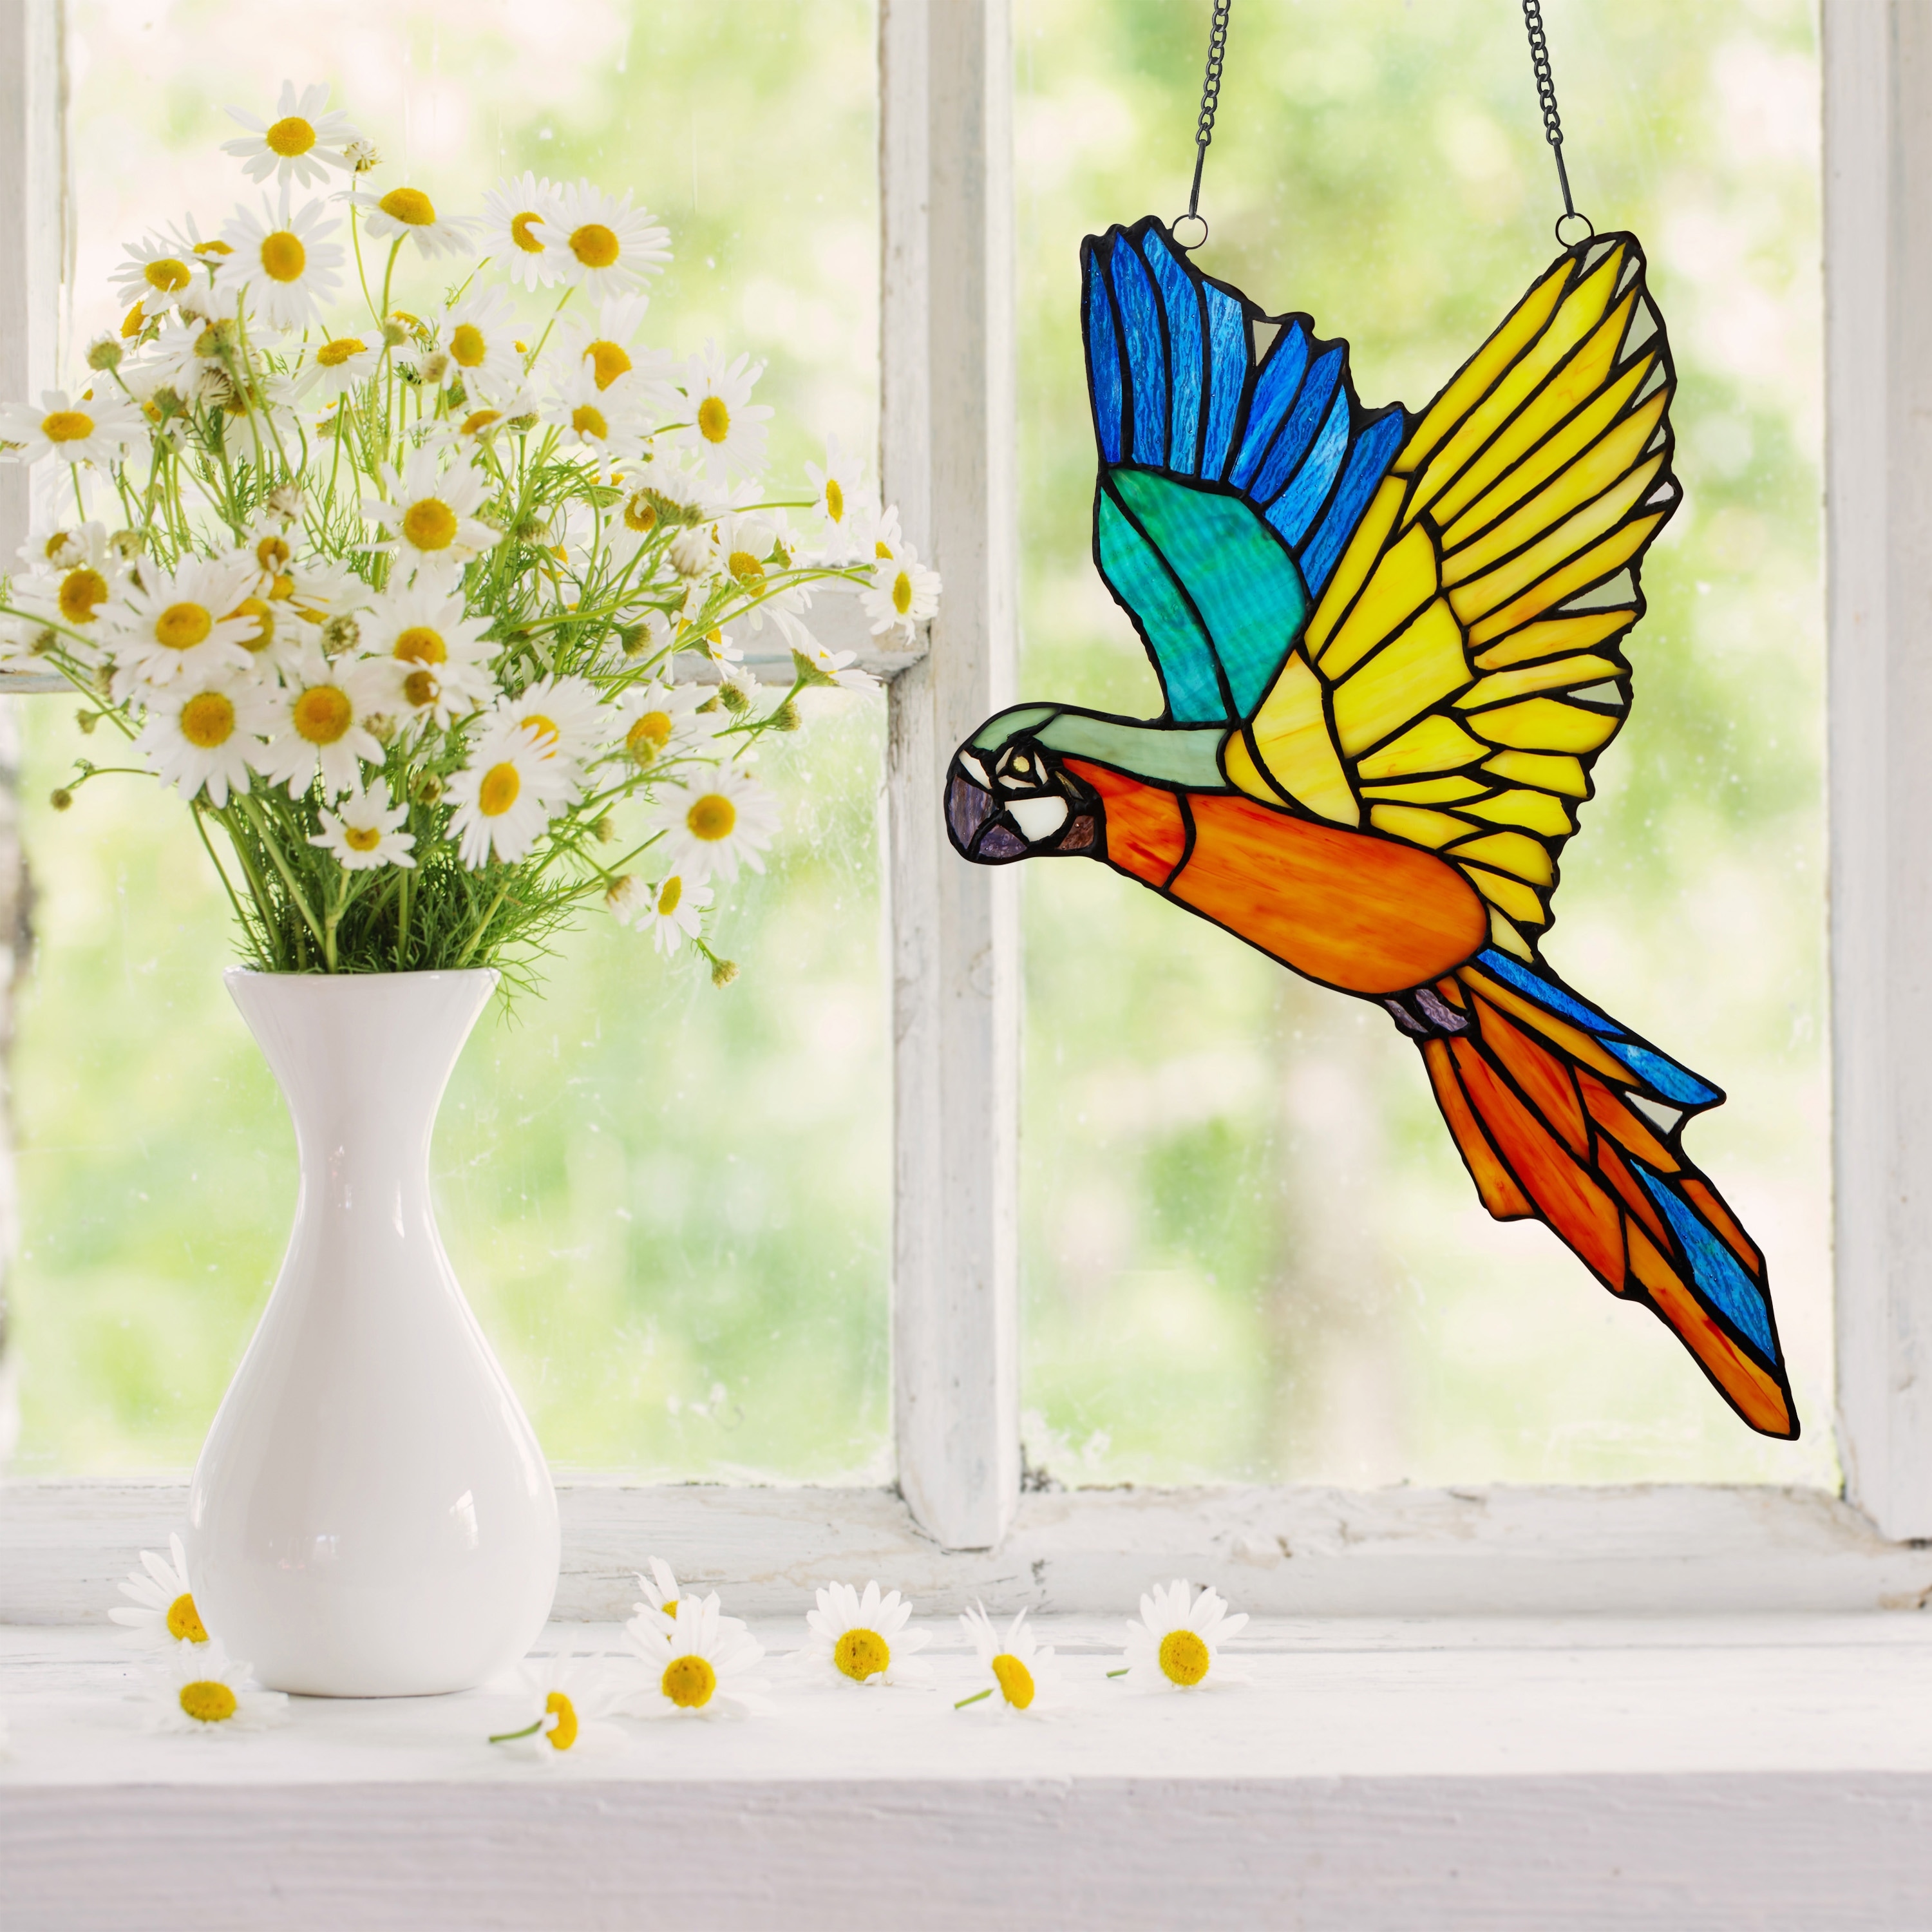 River of Goods Dali River of Goods 16-Inch Flying Tropical Parrot Stained  Glass Window Panel 11.5